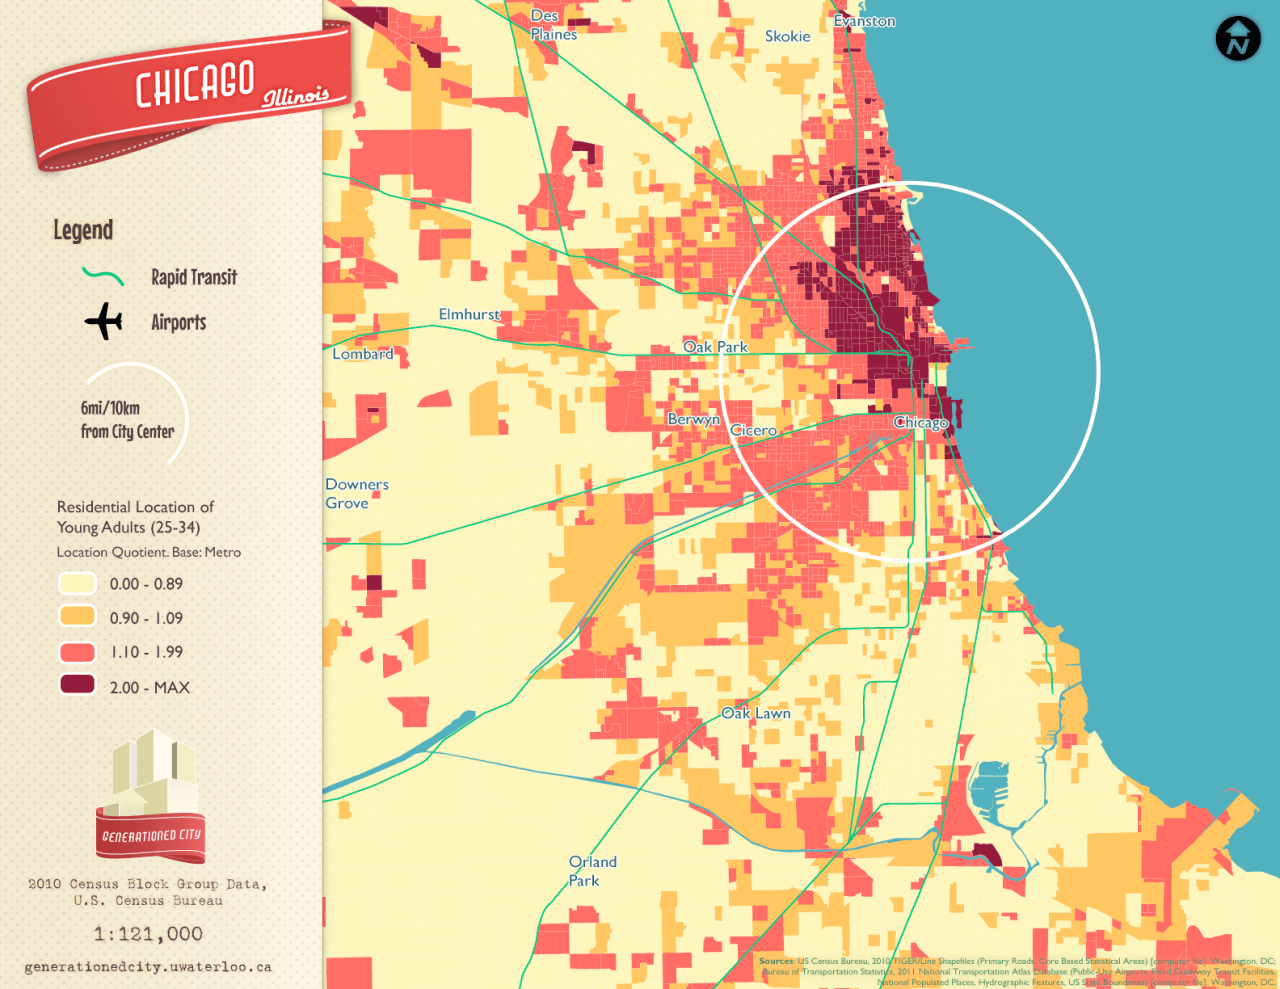 Residential location of young adults in Chicago.